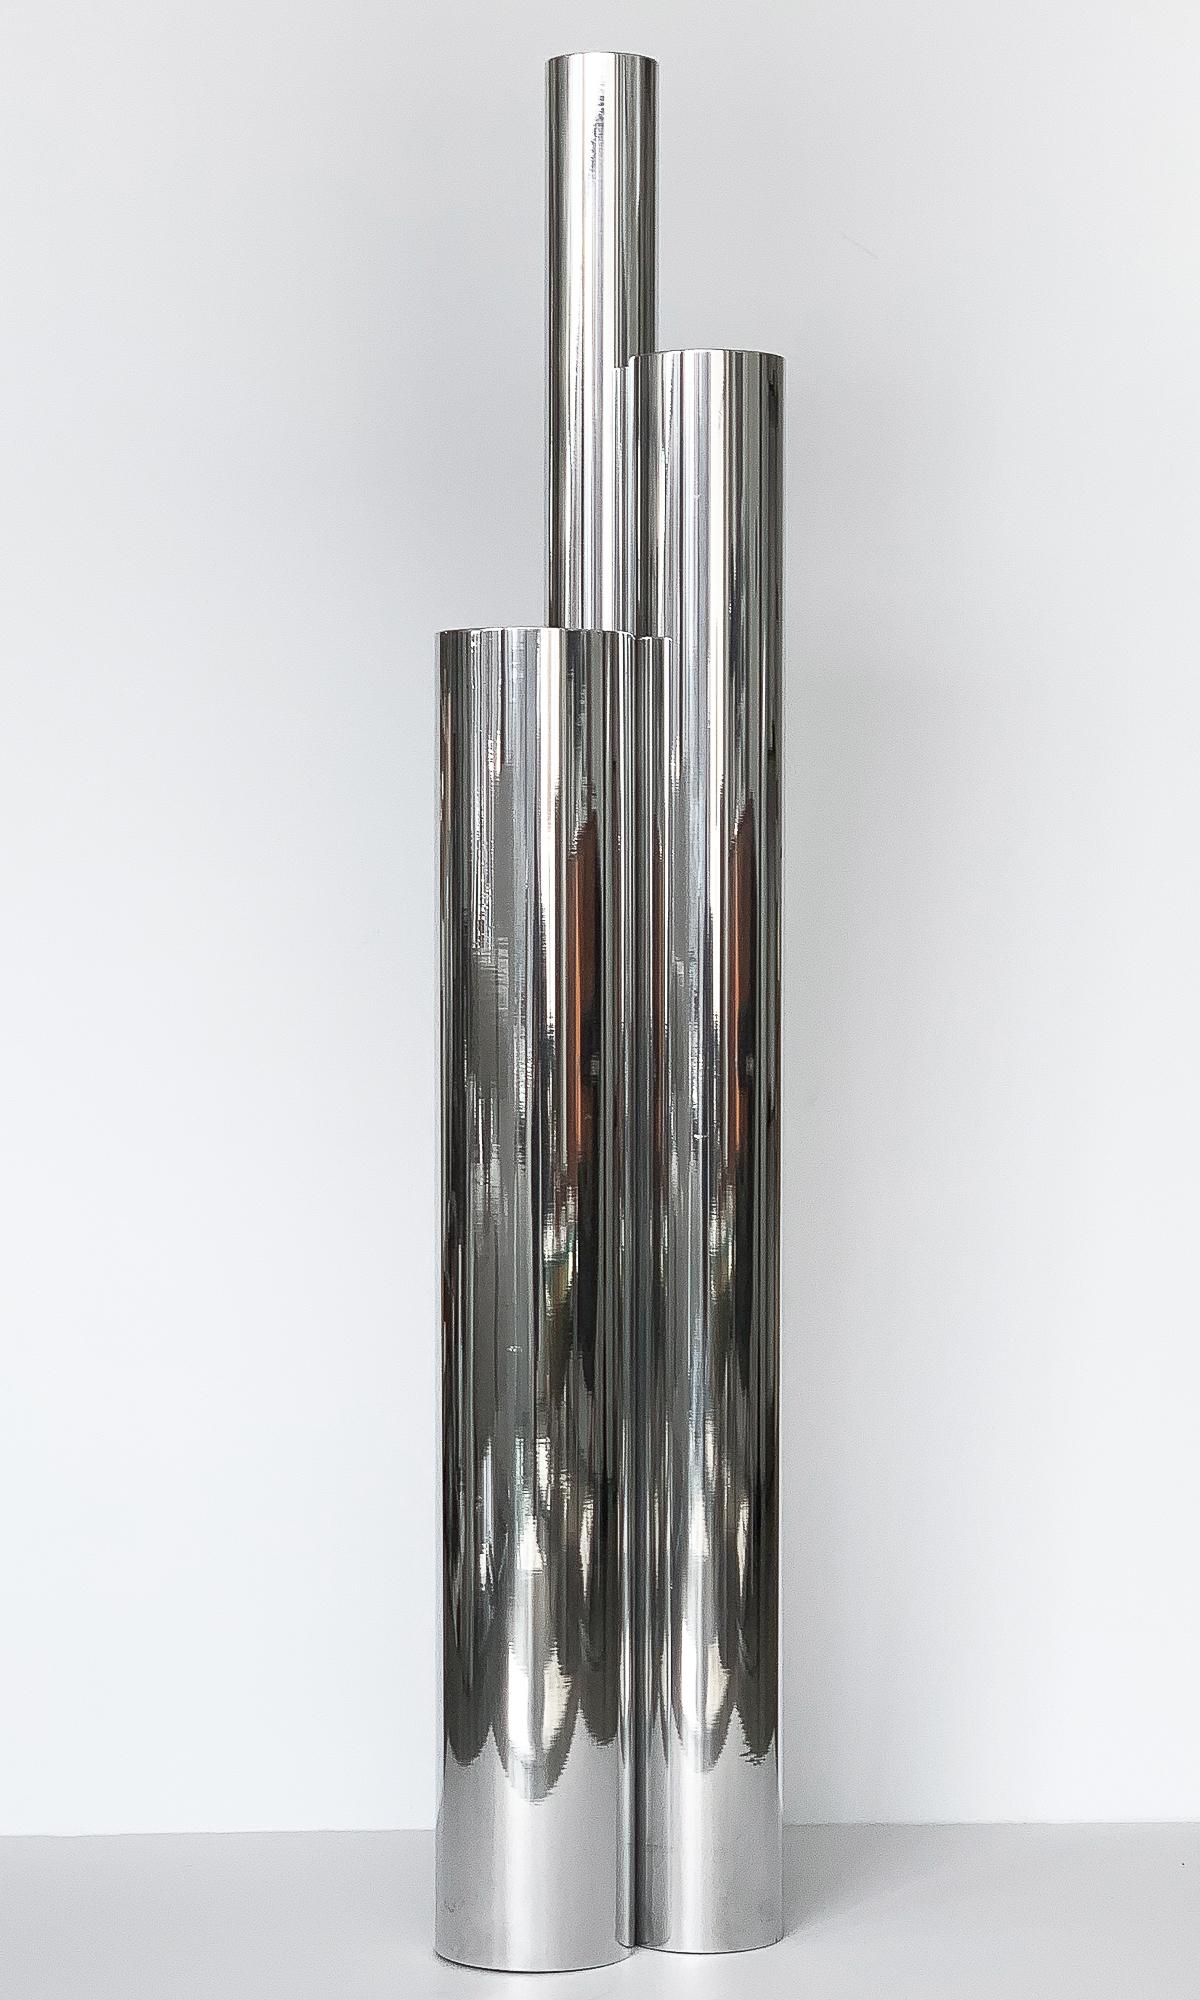 Tubular polished aluminum skyscraper floor lamp, circa 1960s. Three mirror polished aluminum tubes of varying heights, matte black interior, each with a recessed light. Takes 3 standard base light bulbs. In-line on/off pedal floor switch. Working